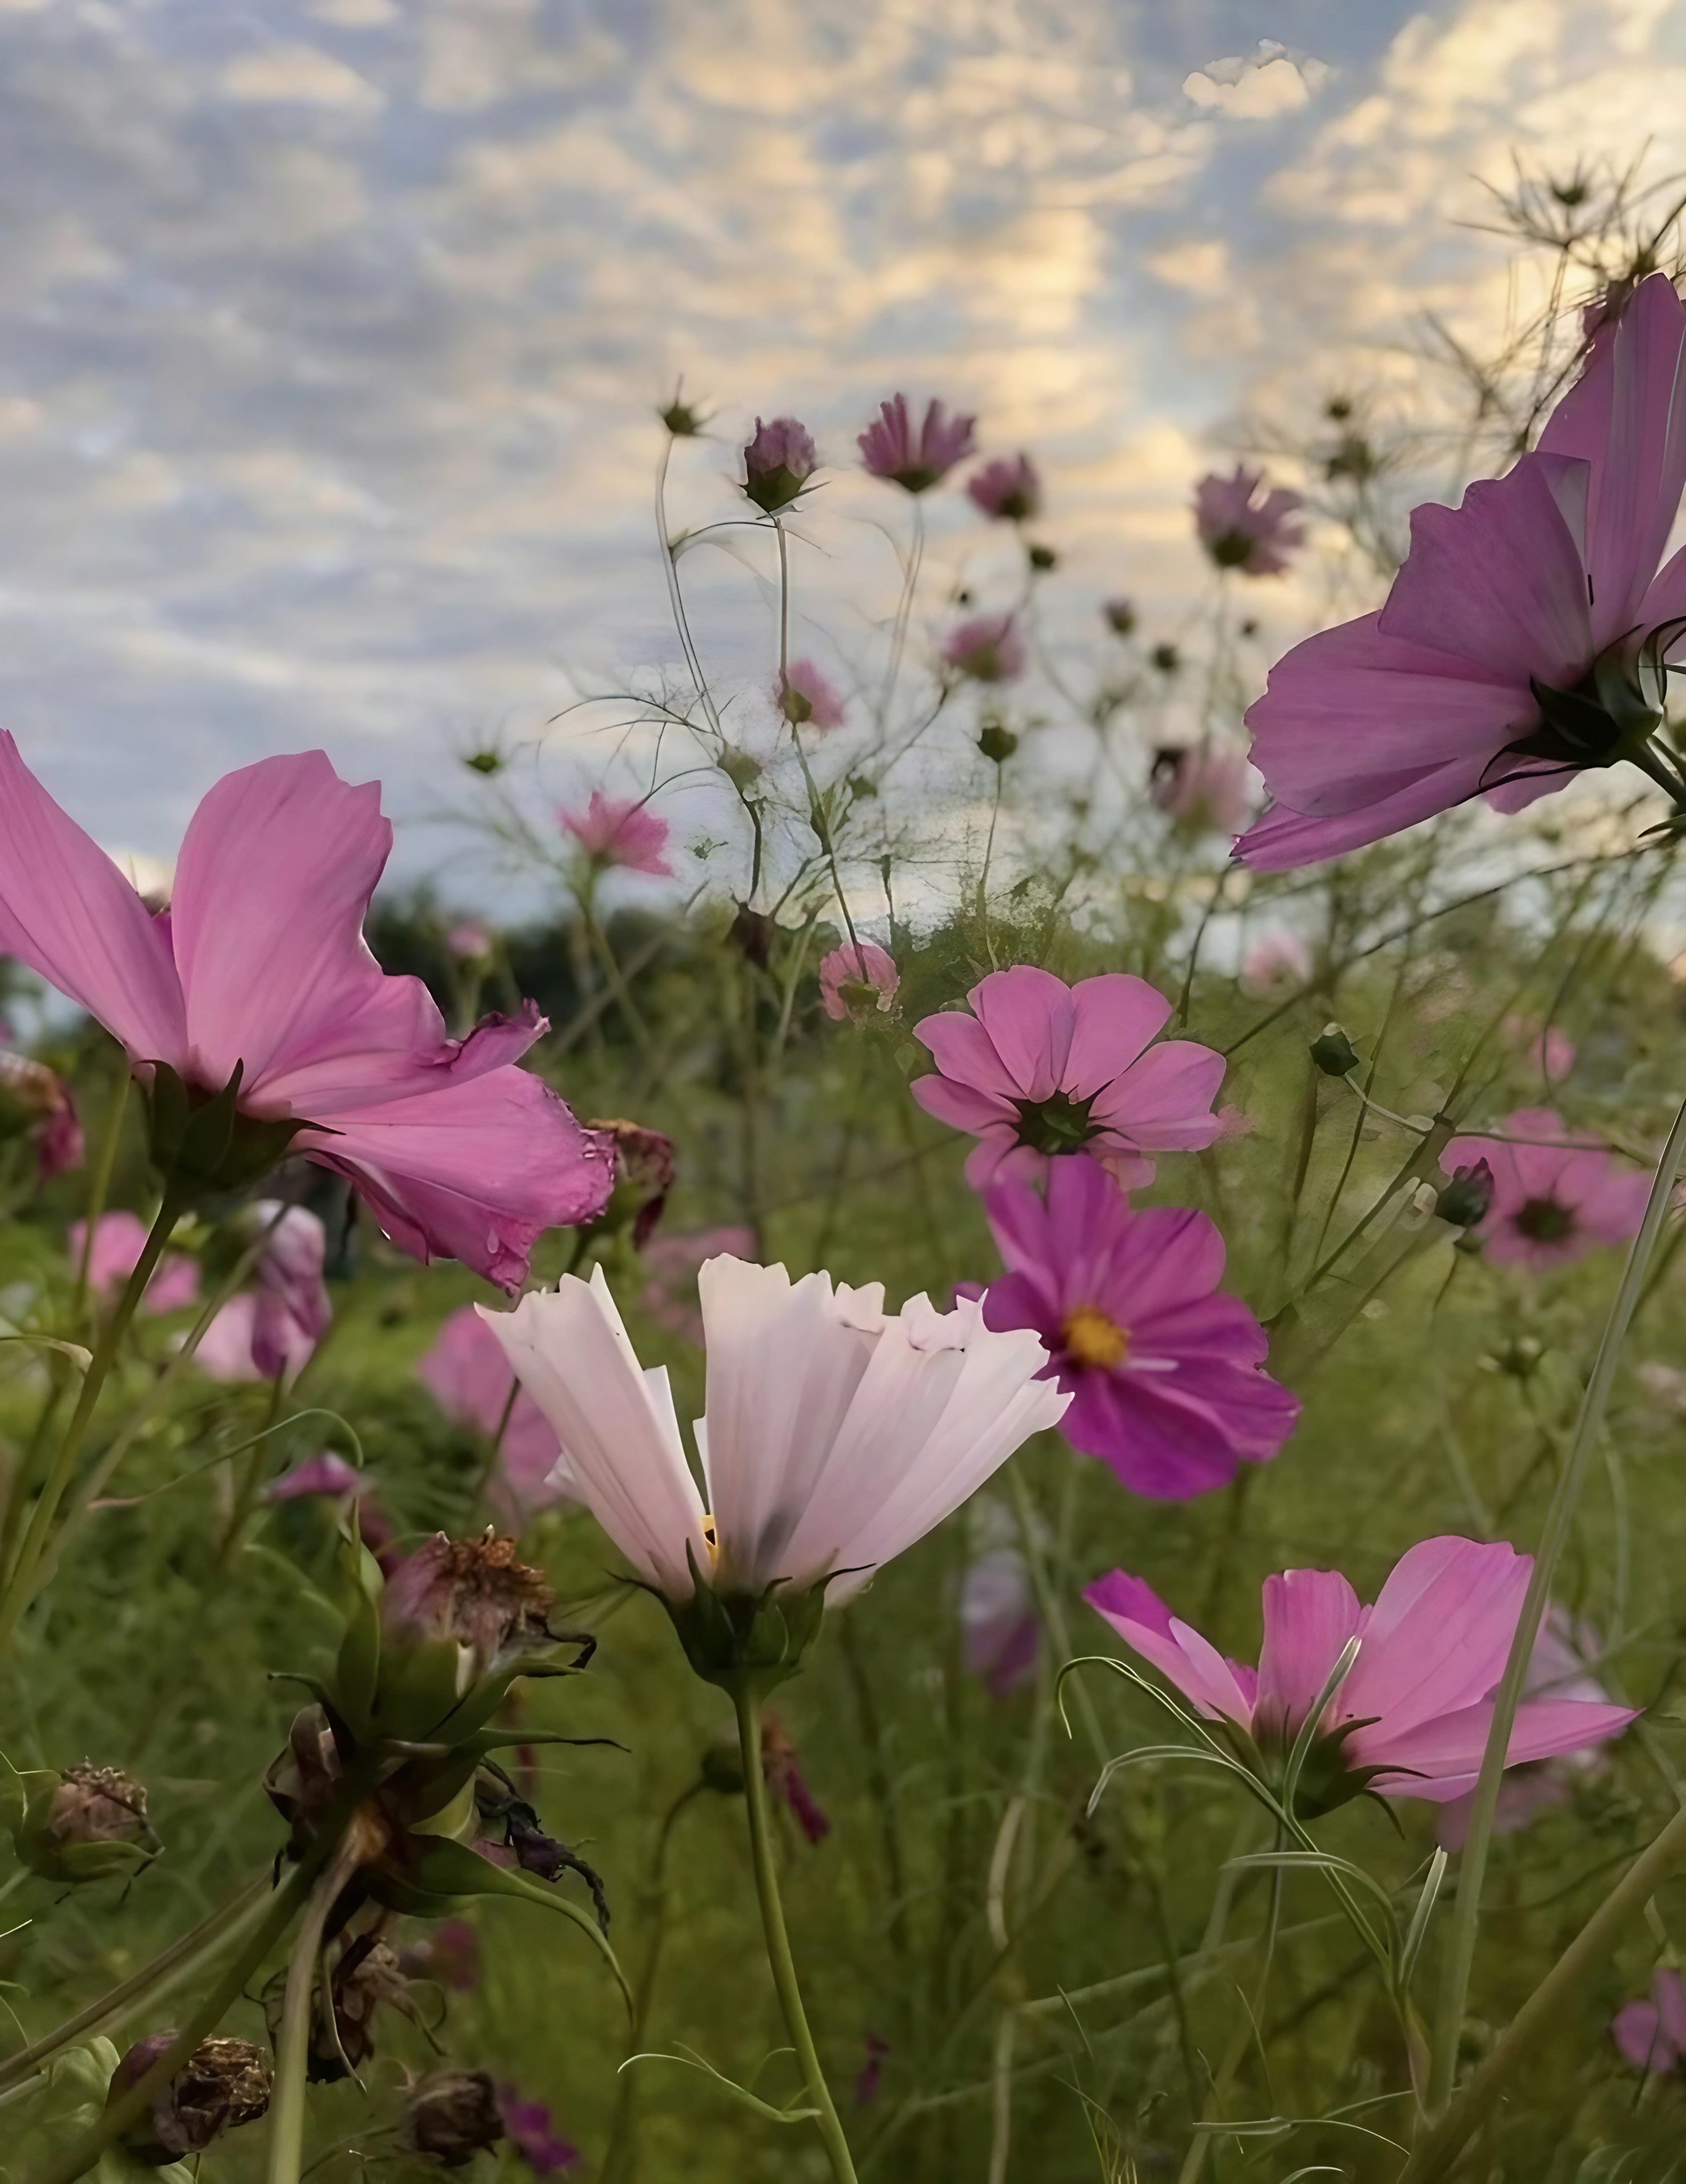 Cosmos Seashell flowers against a backdrop of the evening sky